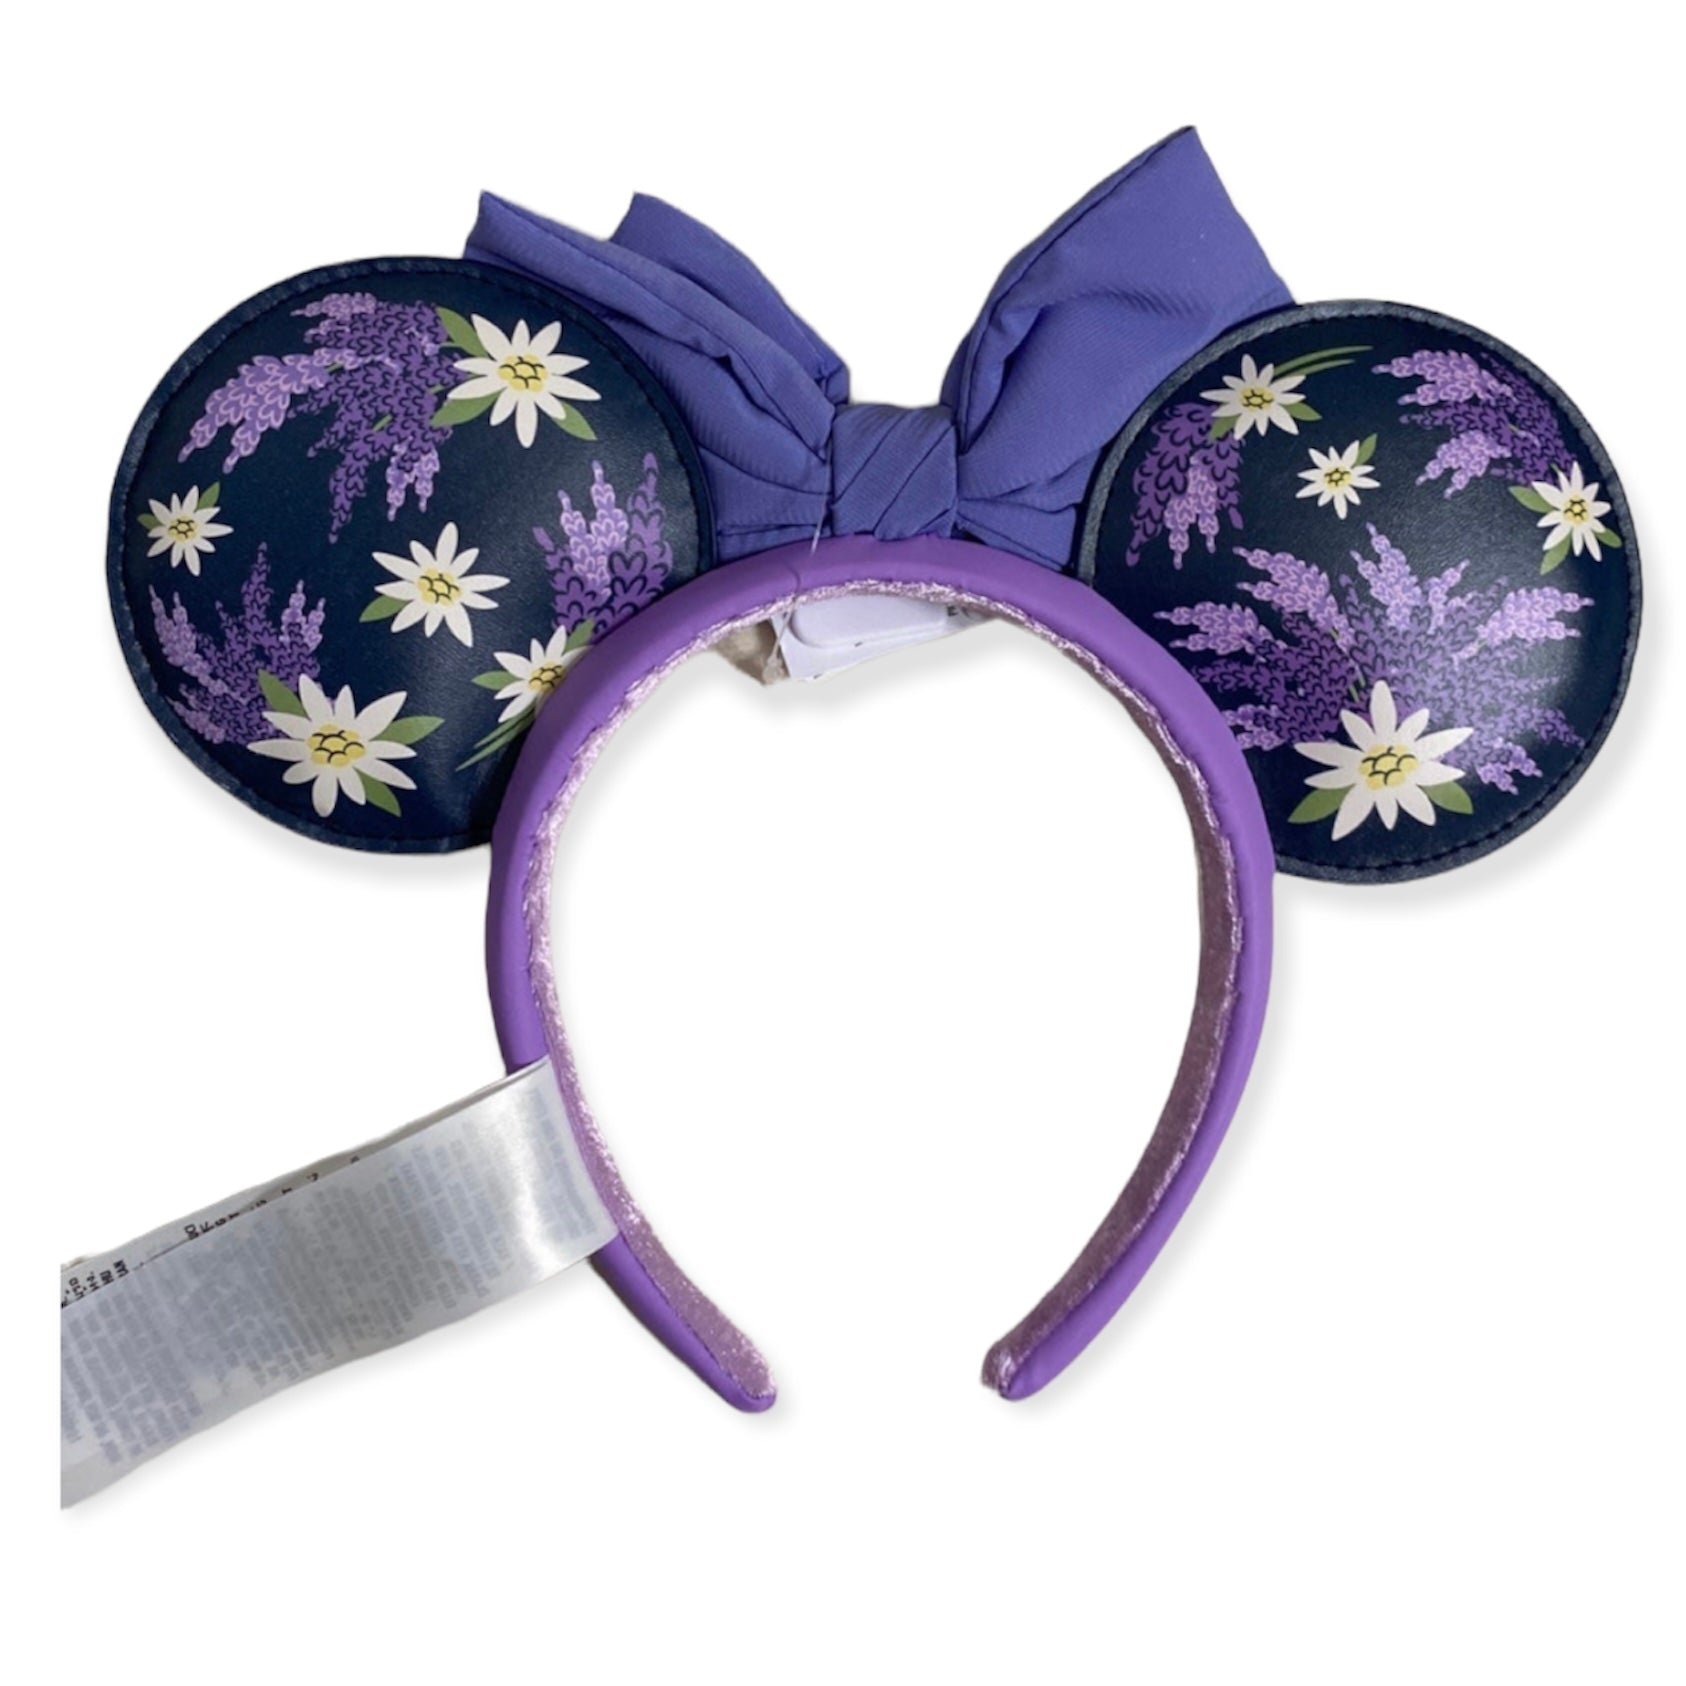 Disneyparks Disney Parks Exclusive - Minnie Mickey Ears Headband Bejeweled Cranberry Red Velvet